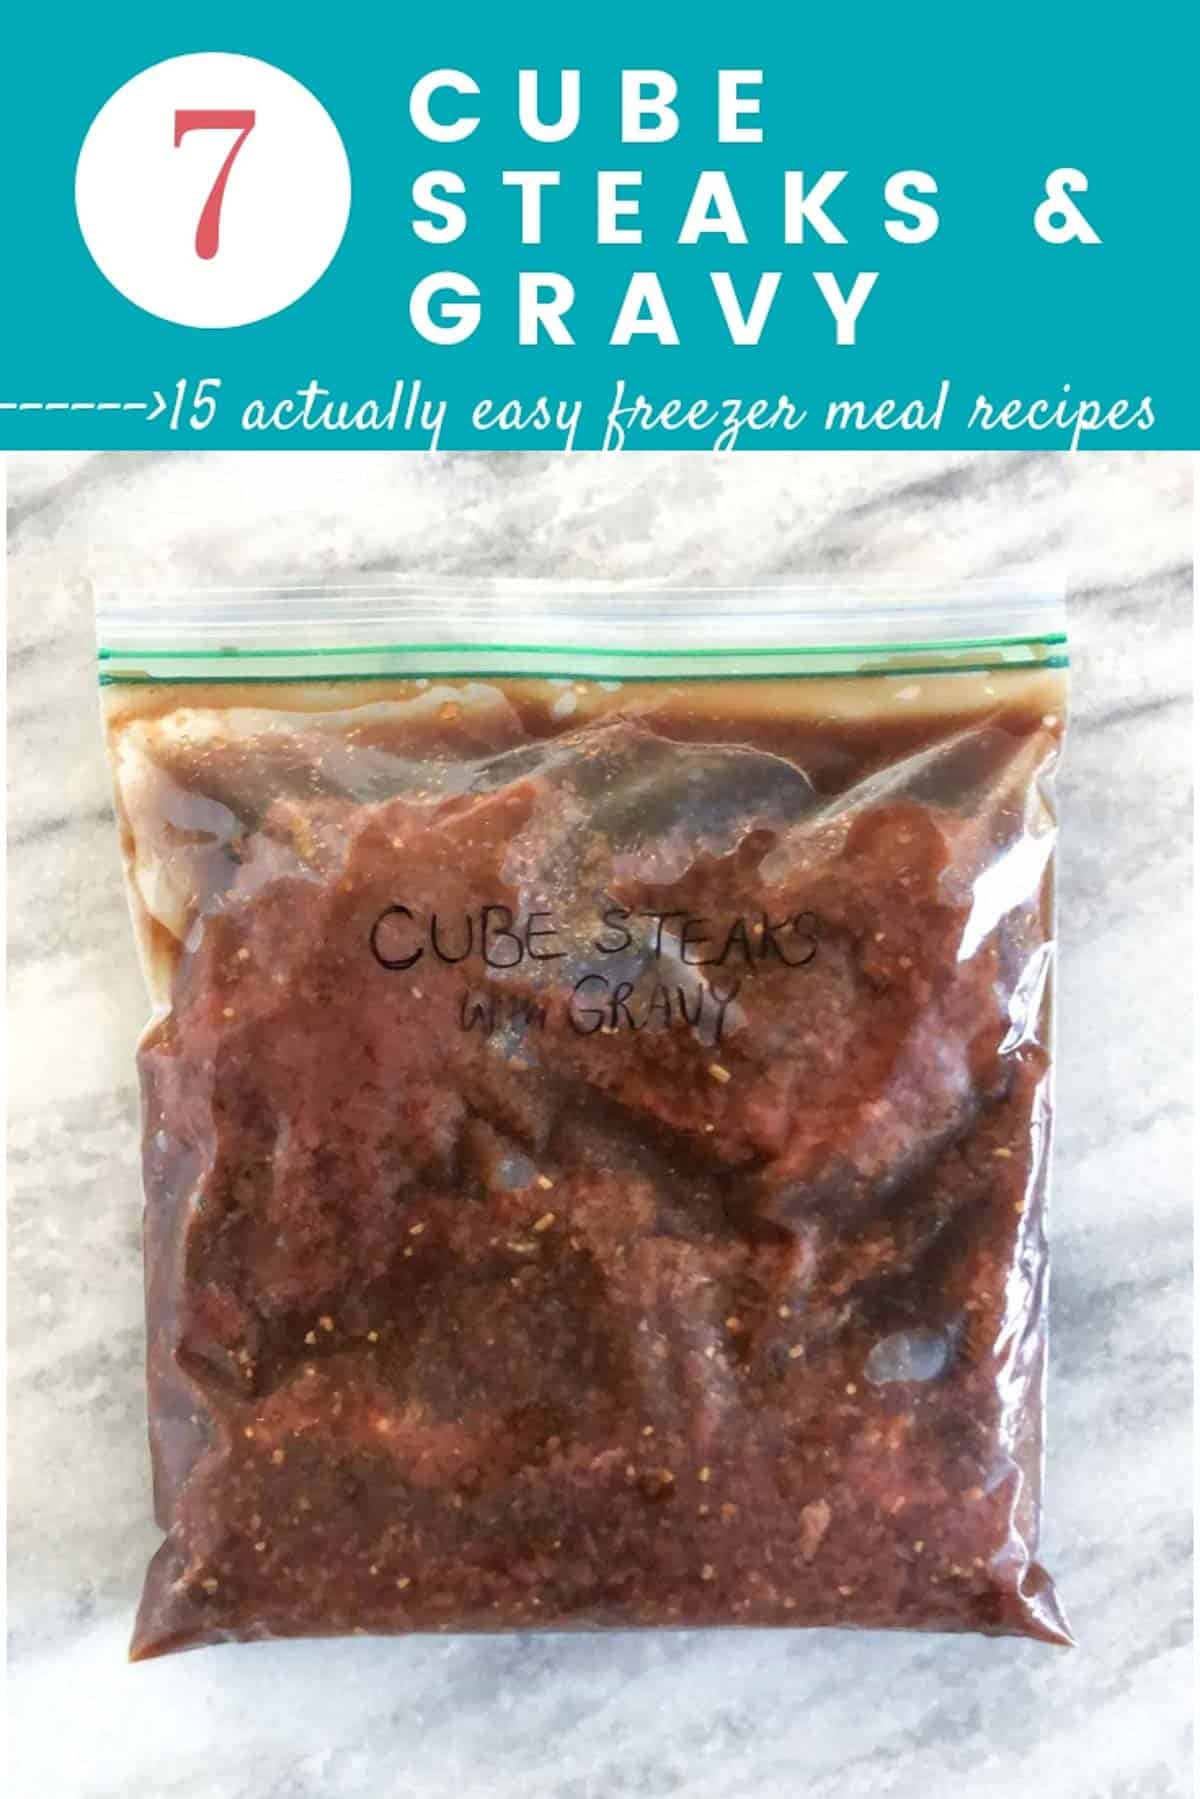 Easy freezer meals to make ahead : Cube Steaks with Gravy recipe freezer meal